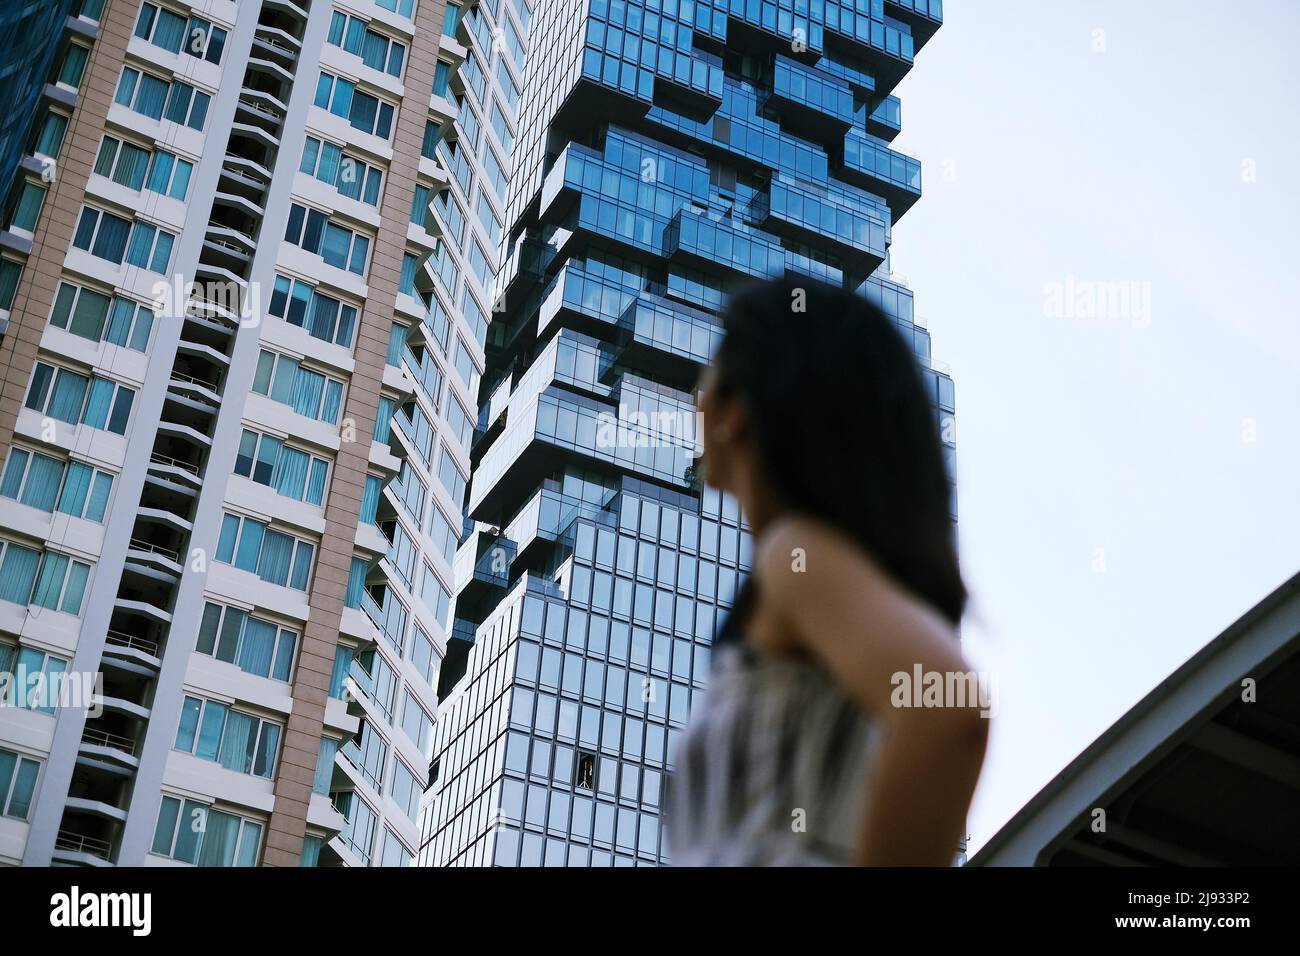 The view of high rise buildings in central Bangkok, Thailand with an out of focus woman looking up at the skyscraper in the foreground. Stock Photo